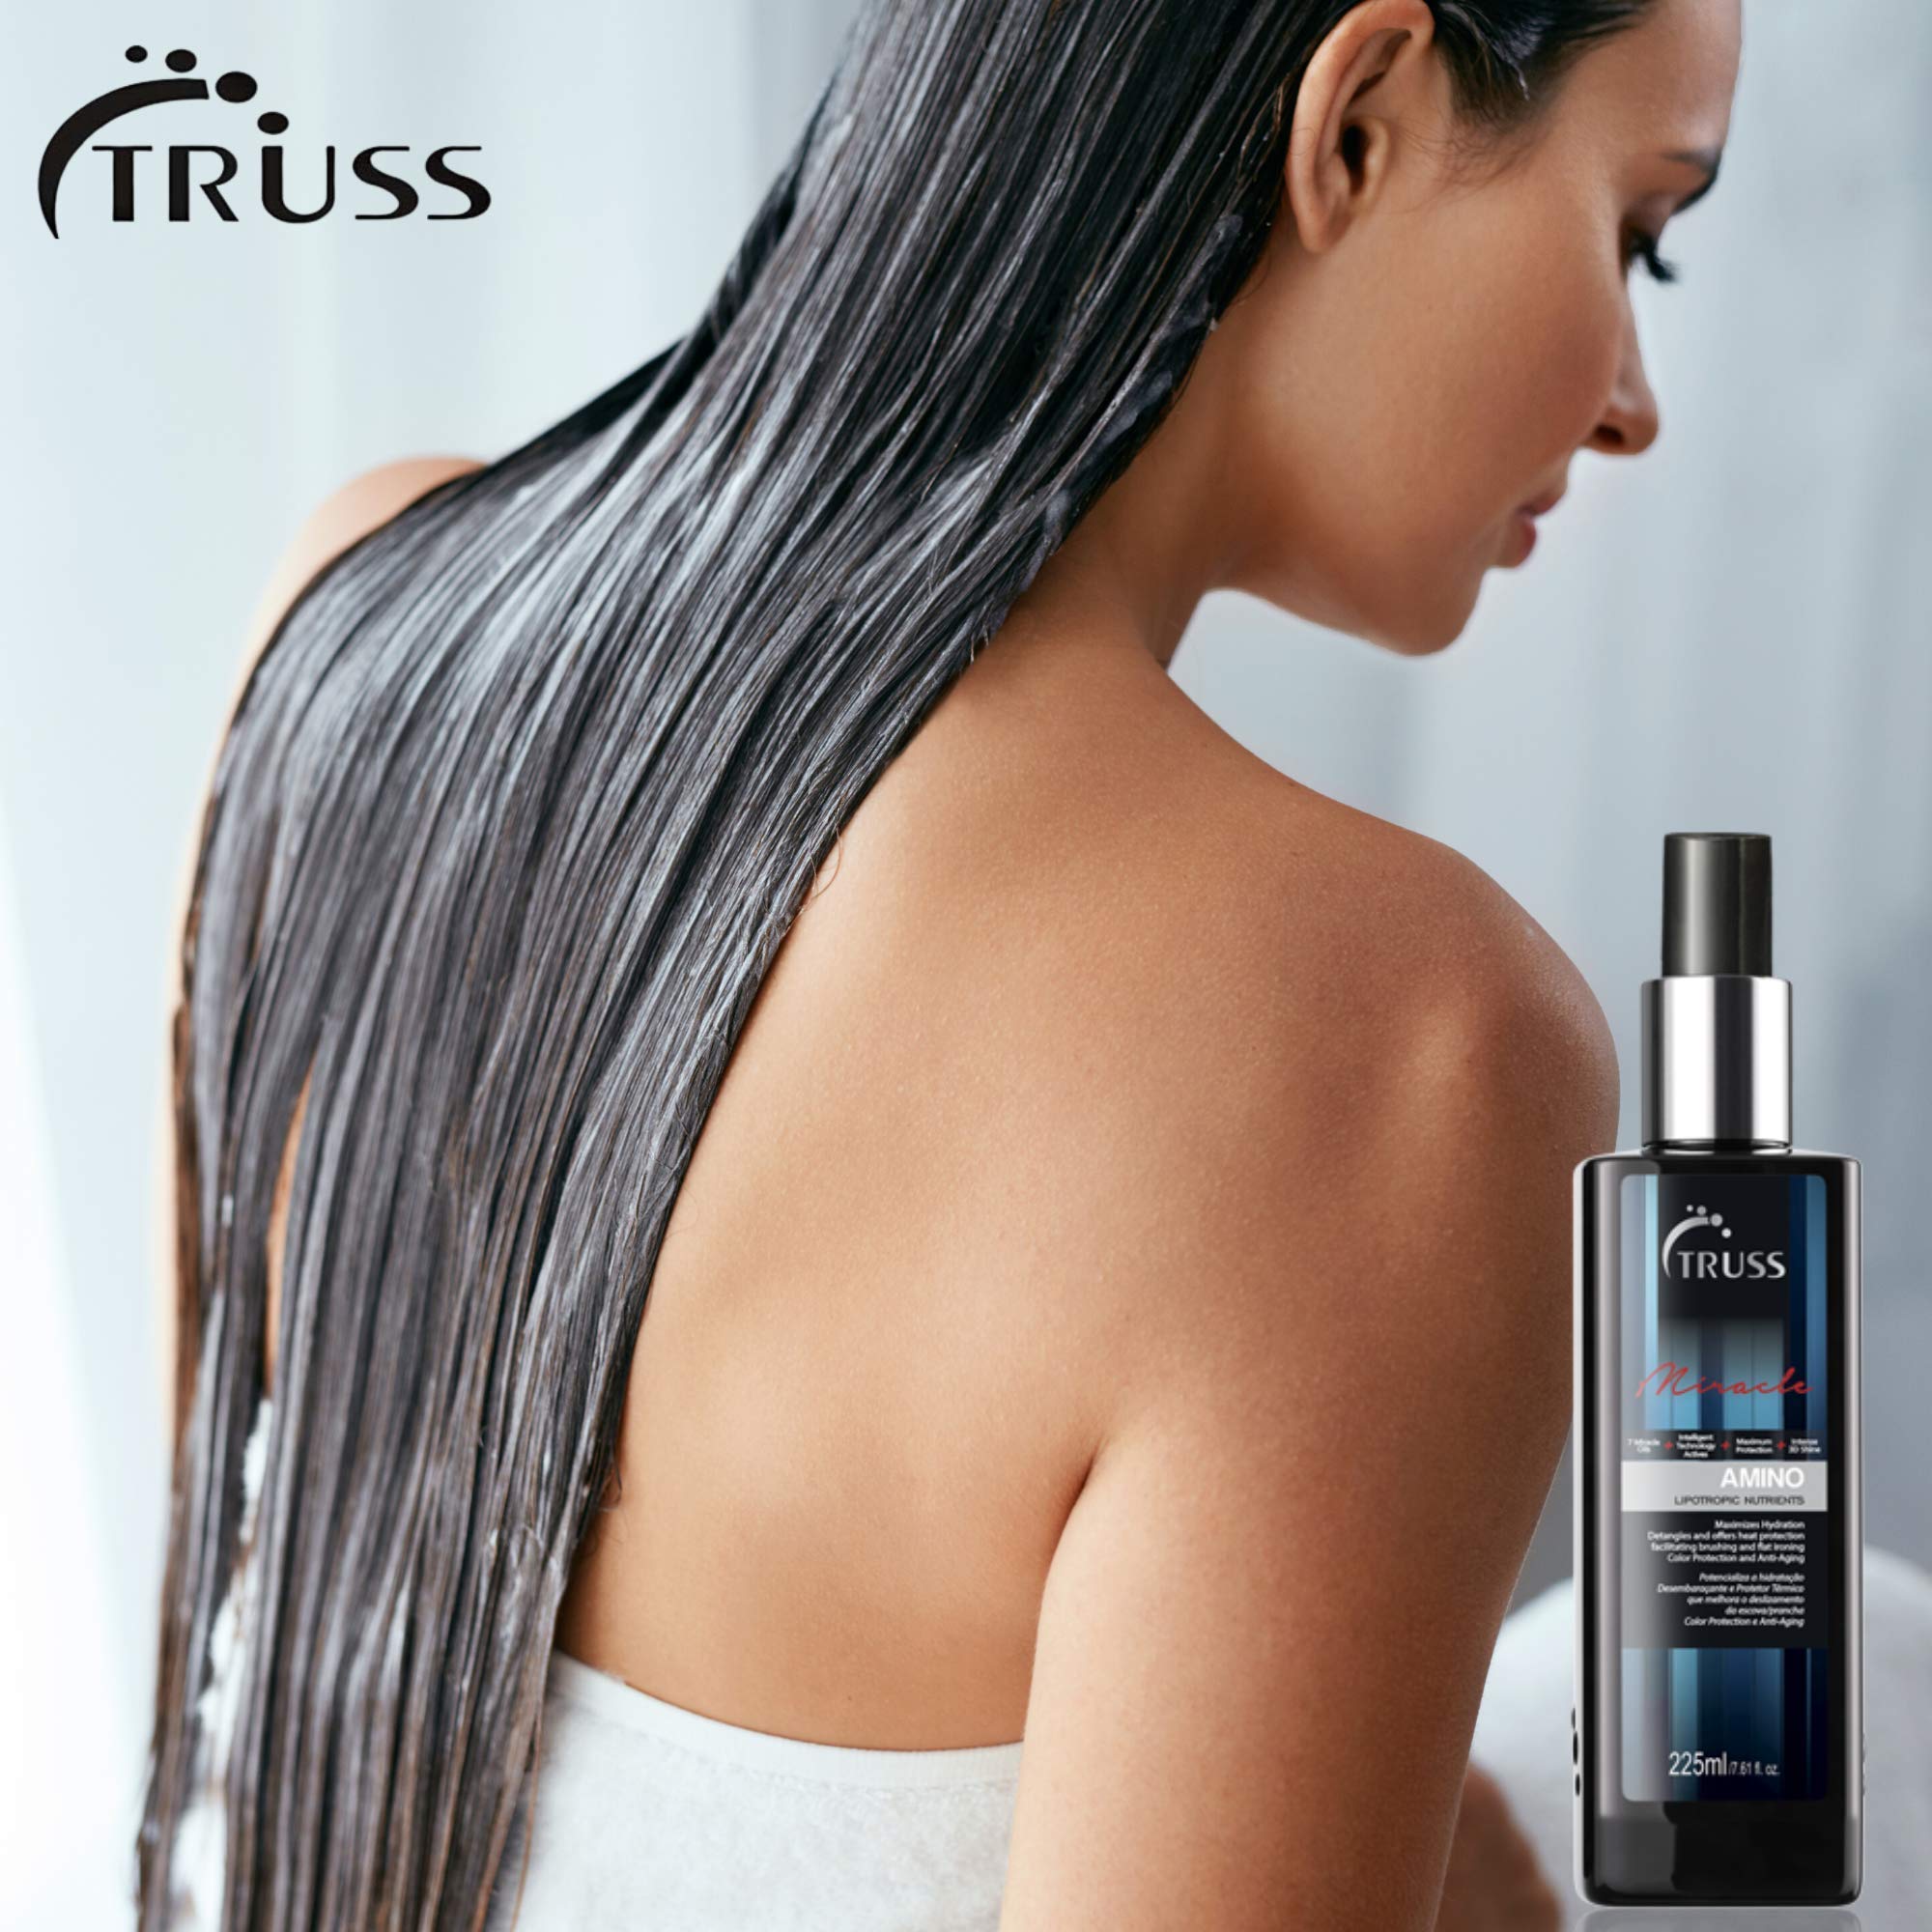 TRUSS Professional Amino Miracle - Heat Protectant Spray Bundle with Miracle Shampoo and Deluxe Prime Hair Treatment